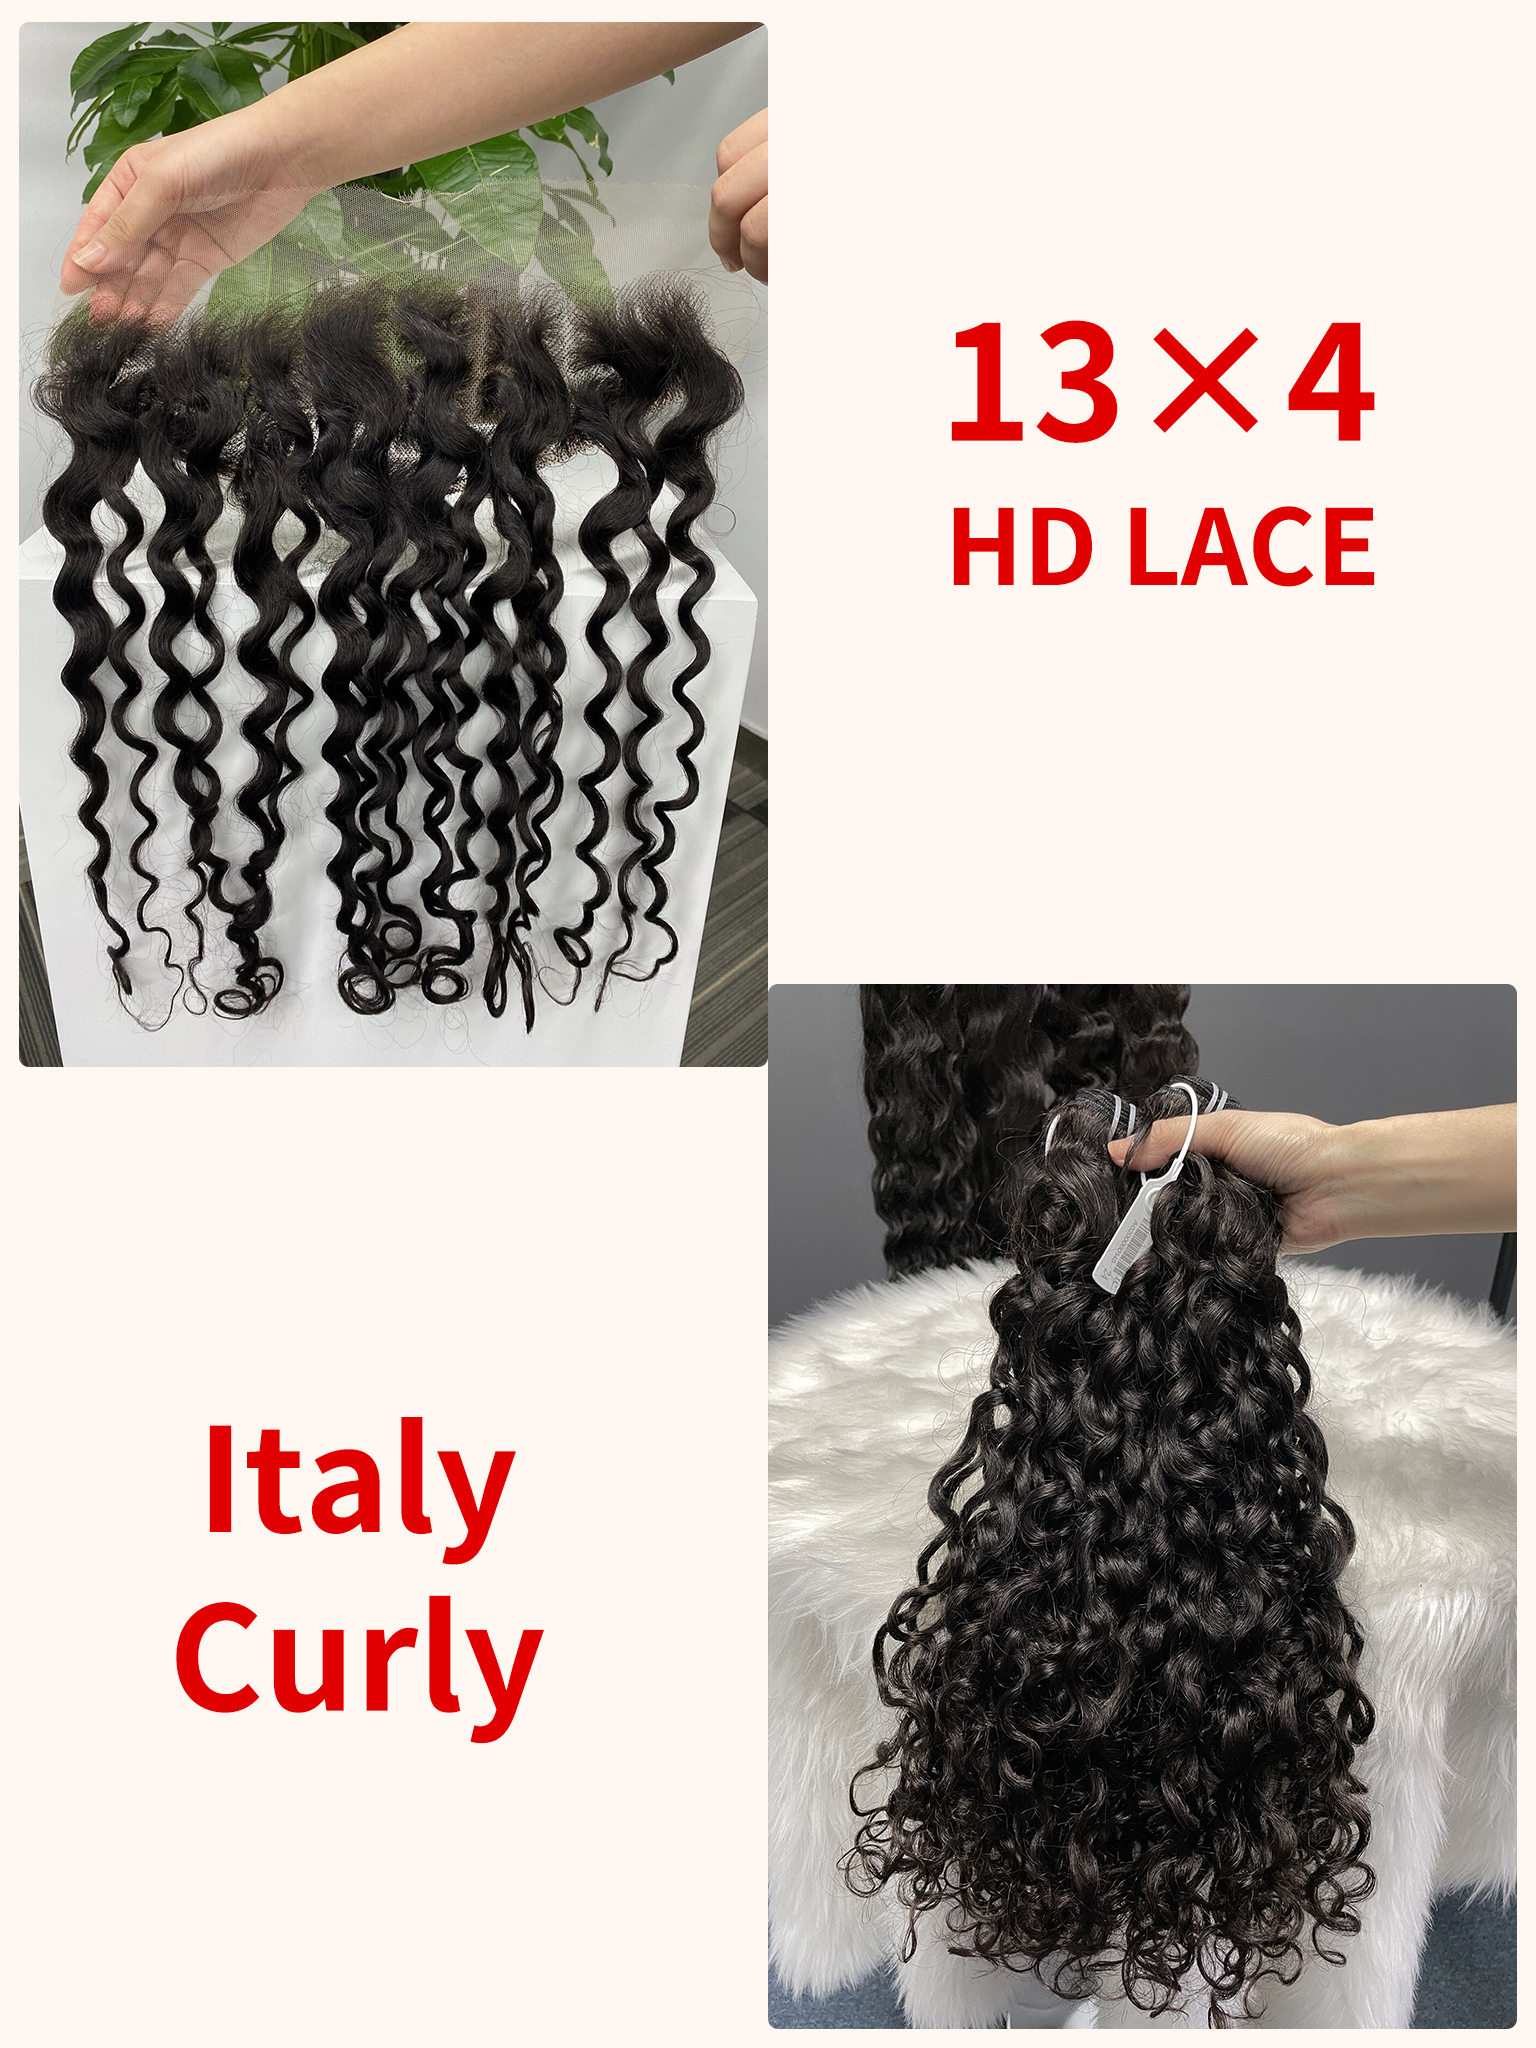 Virgin Italy Curly 16 18 20 Inch And 13x4 HD Lace 16 Inch  Free Shipping